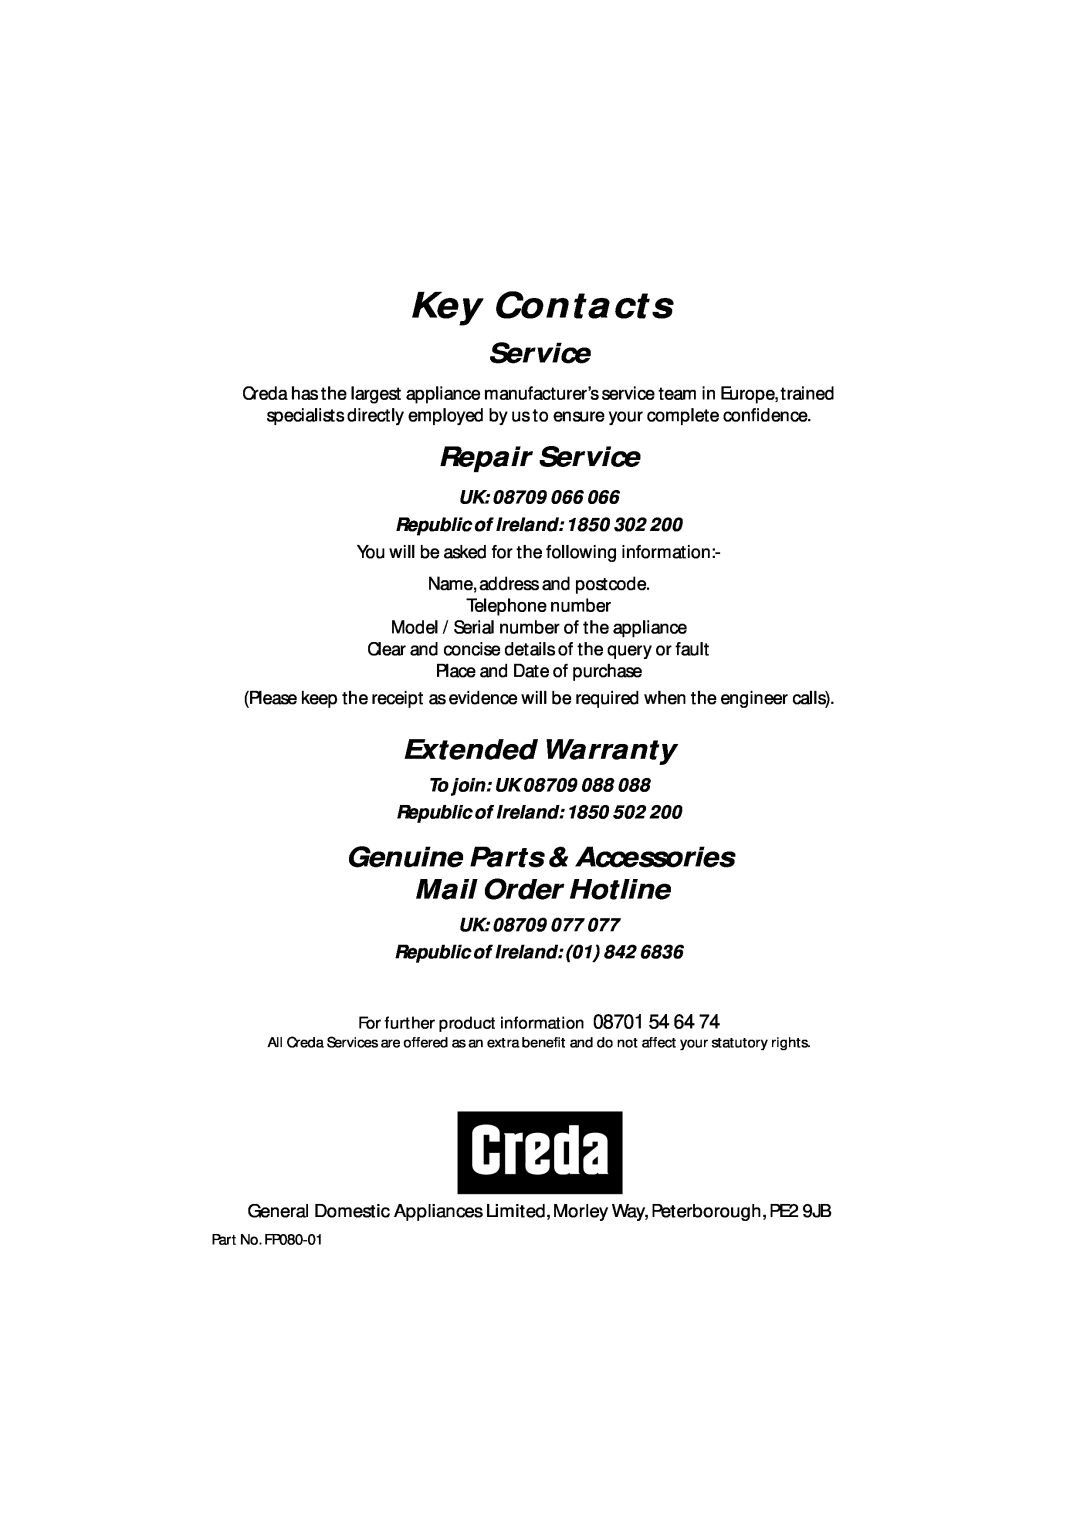 Creda CRC60 manual Key Contacts, Repair Service, Extended Warranty, Genuine Parts & Accessories Mail Order Hotline 